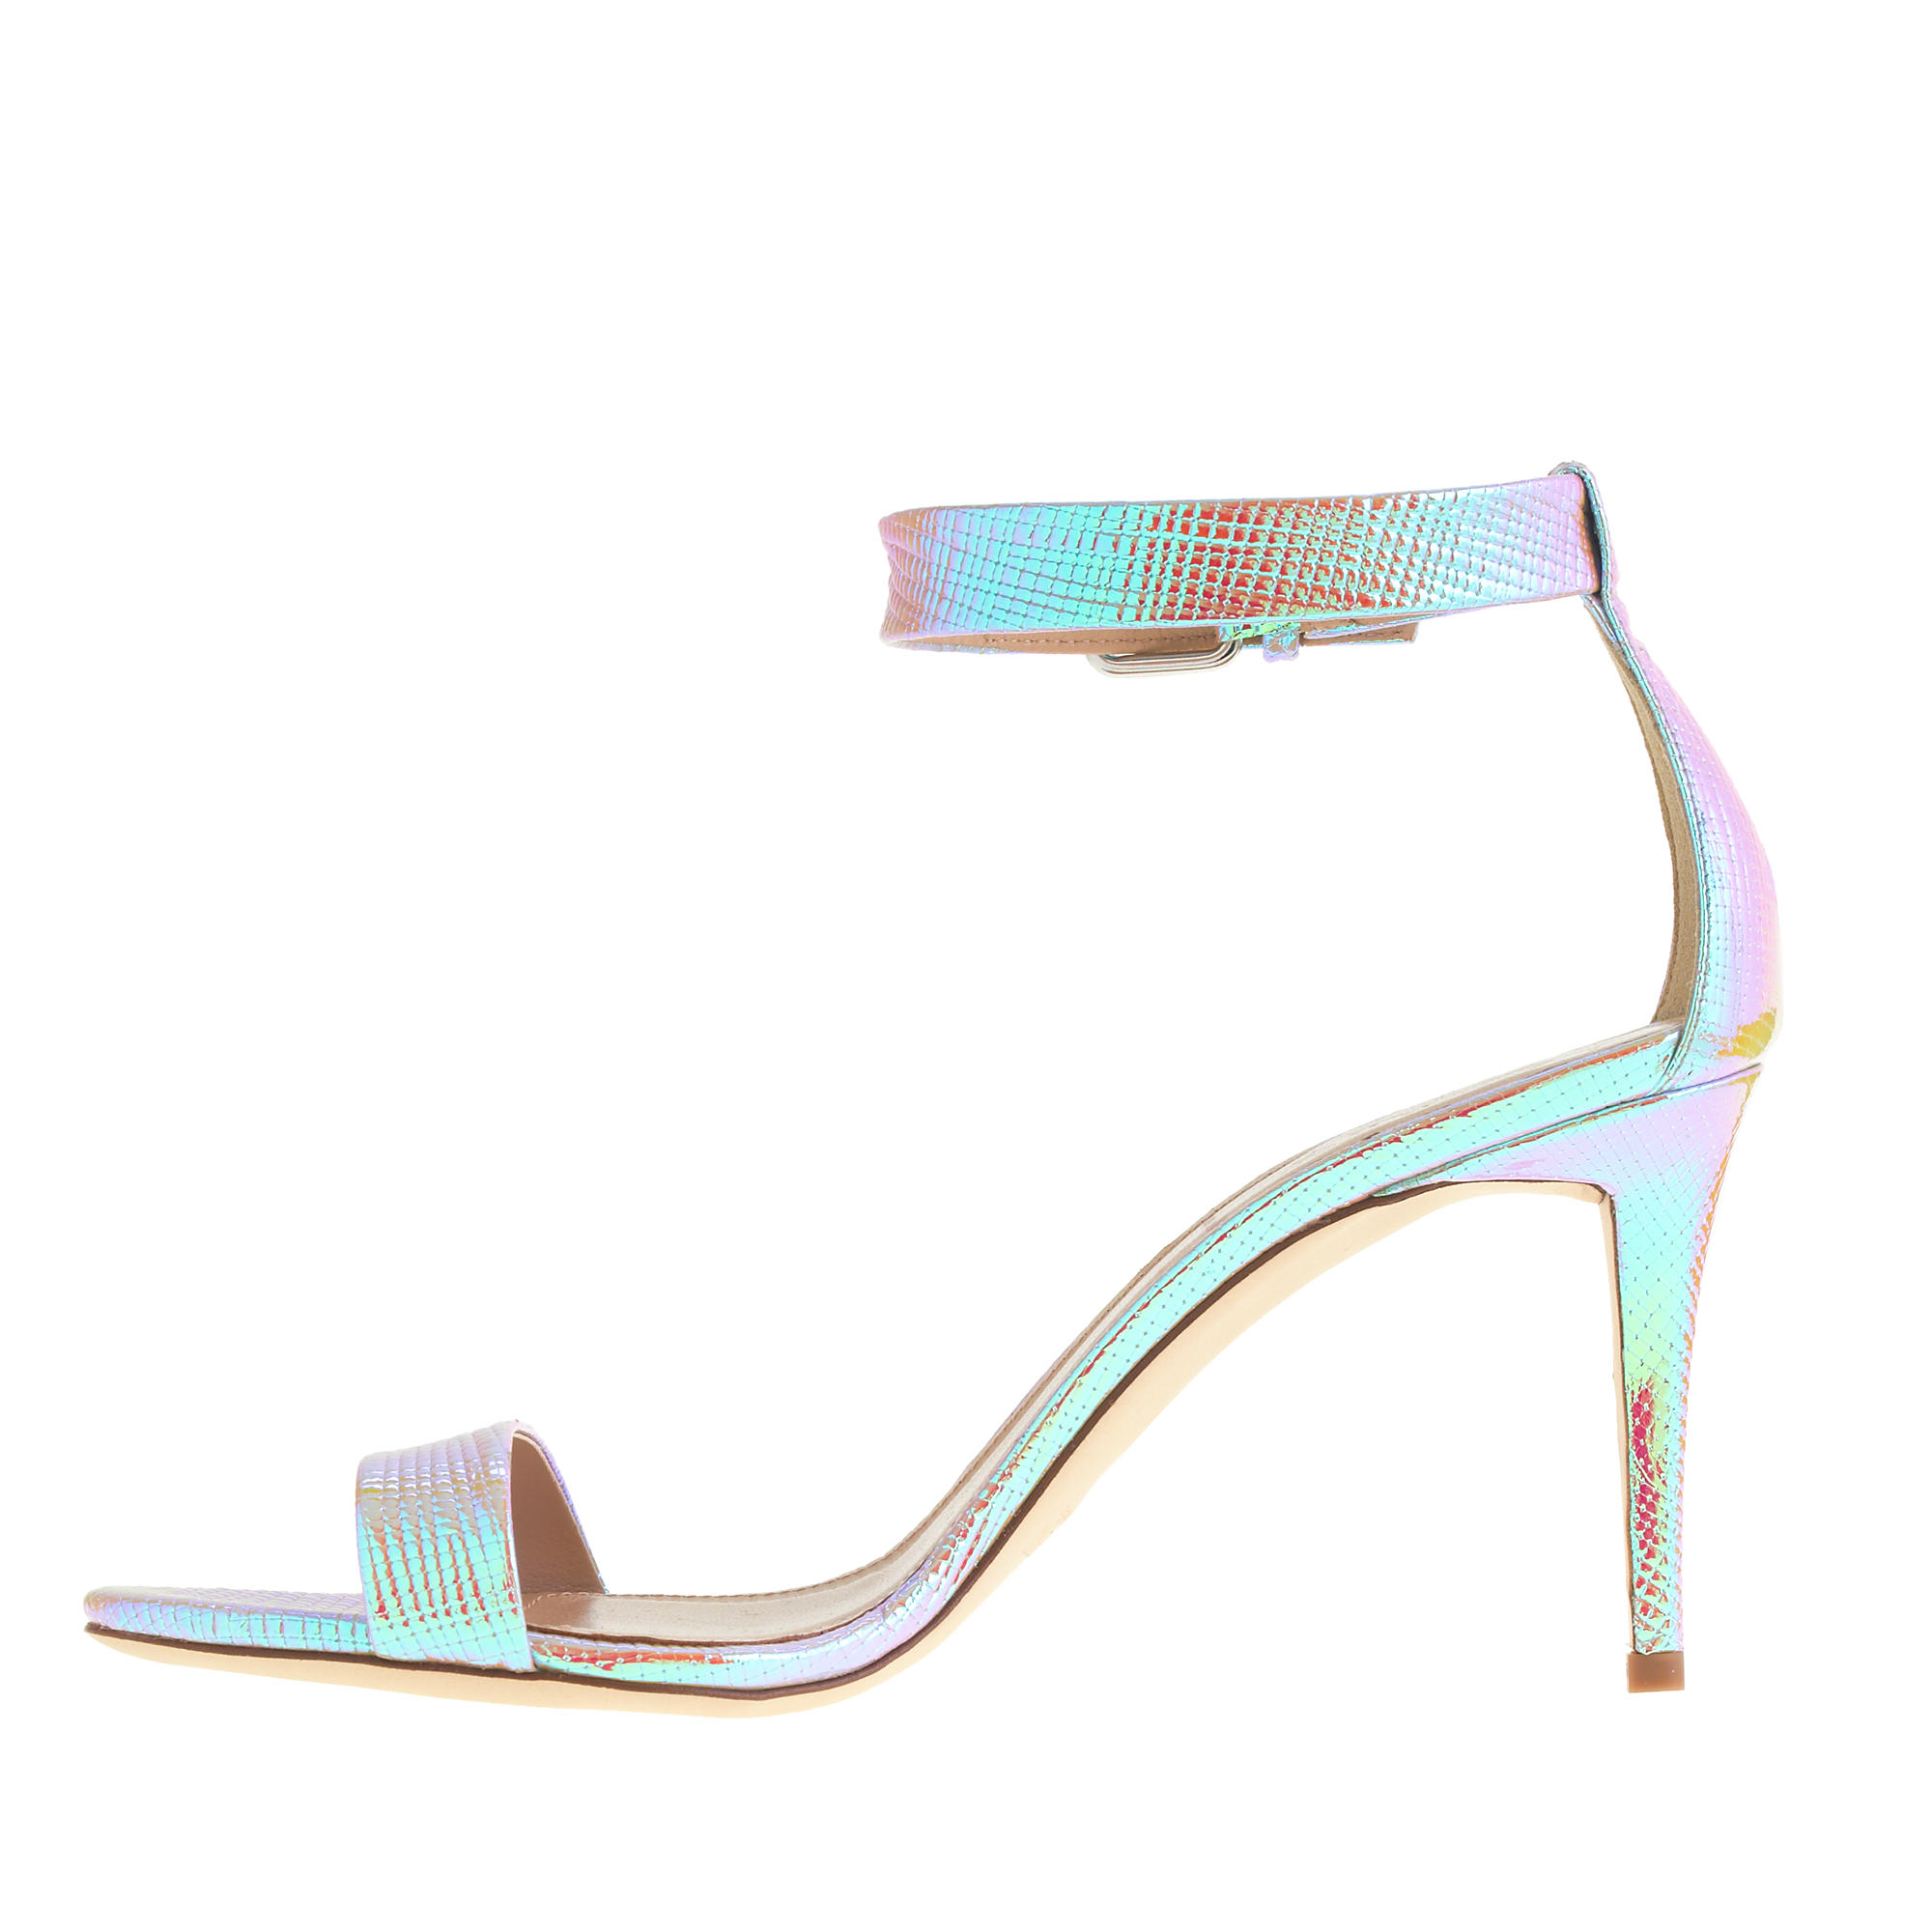 Truffle Collection pointed slingback stiletto heel shoes in iridescent |  ASOS